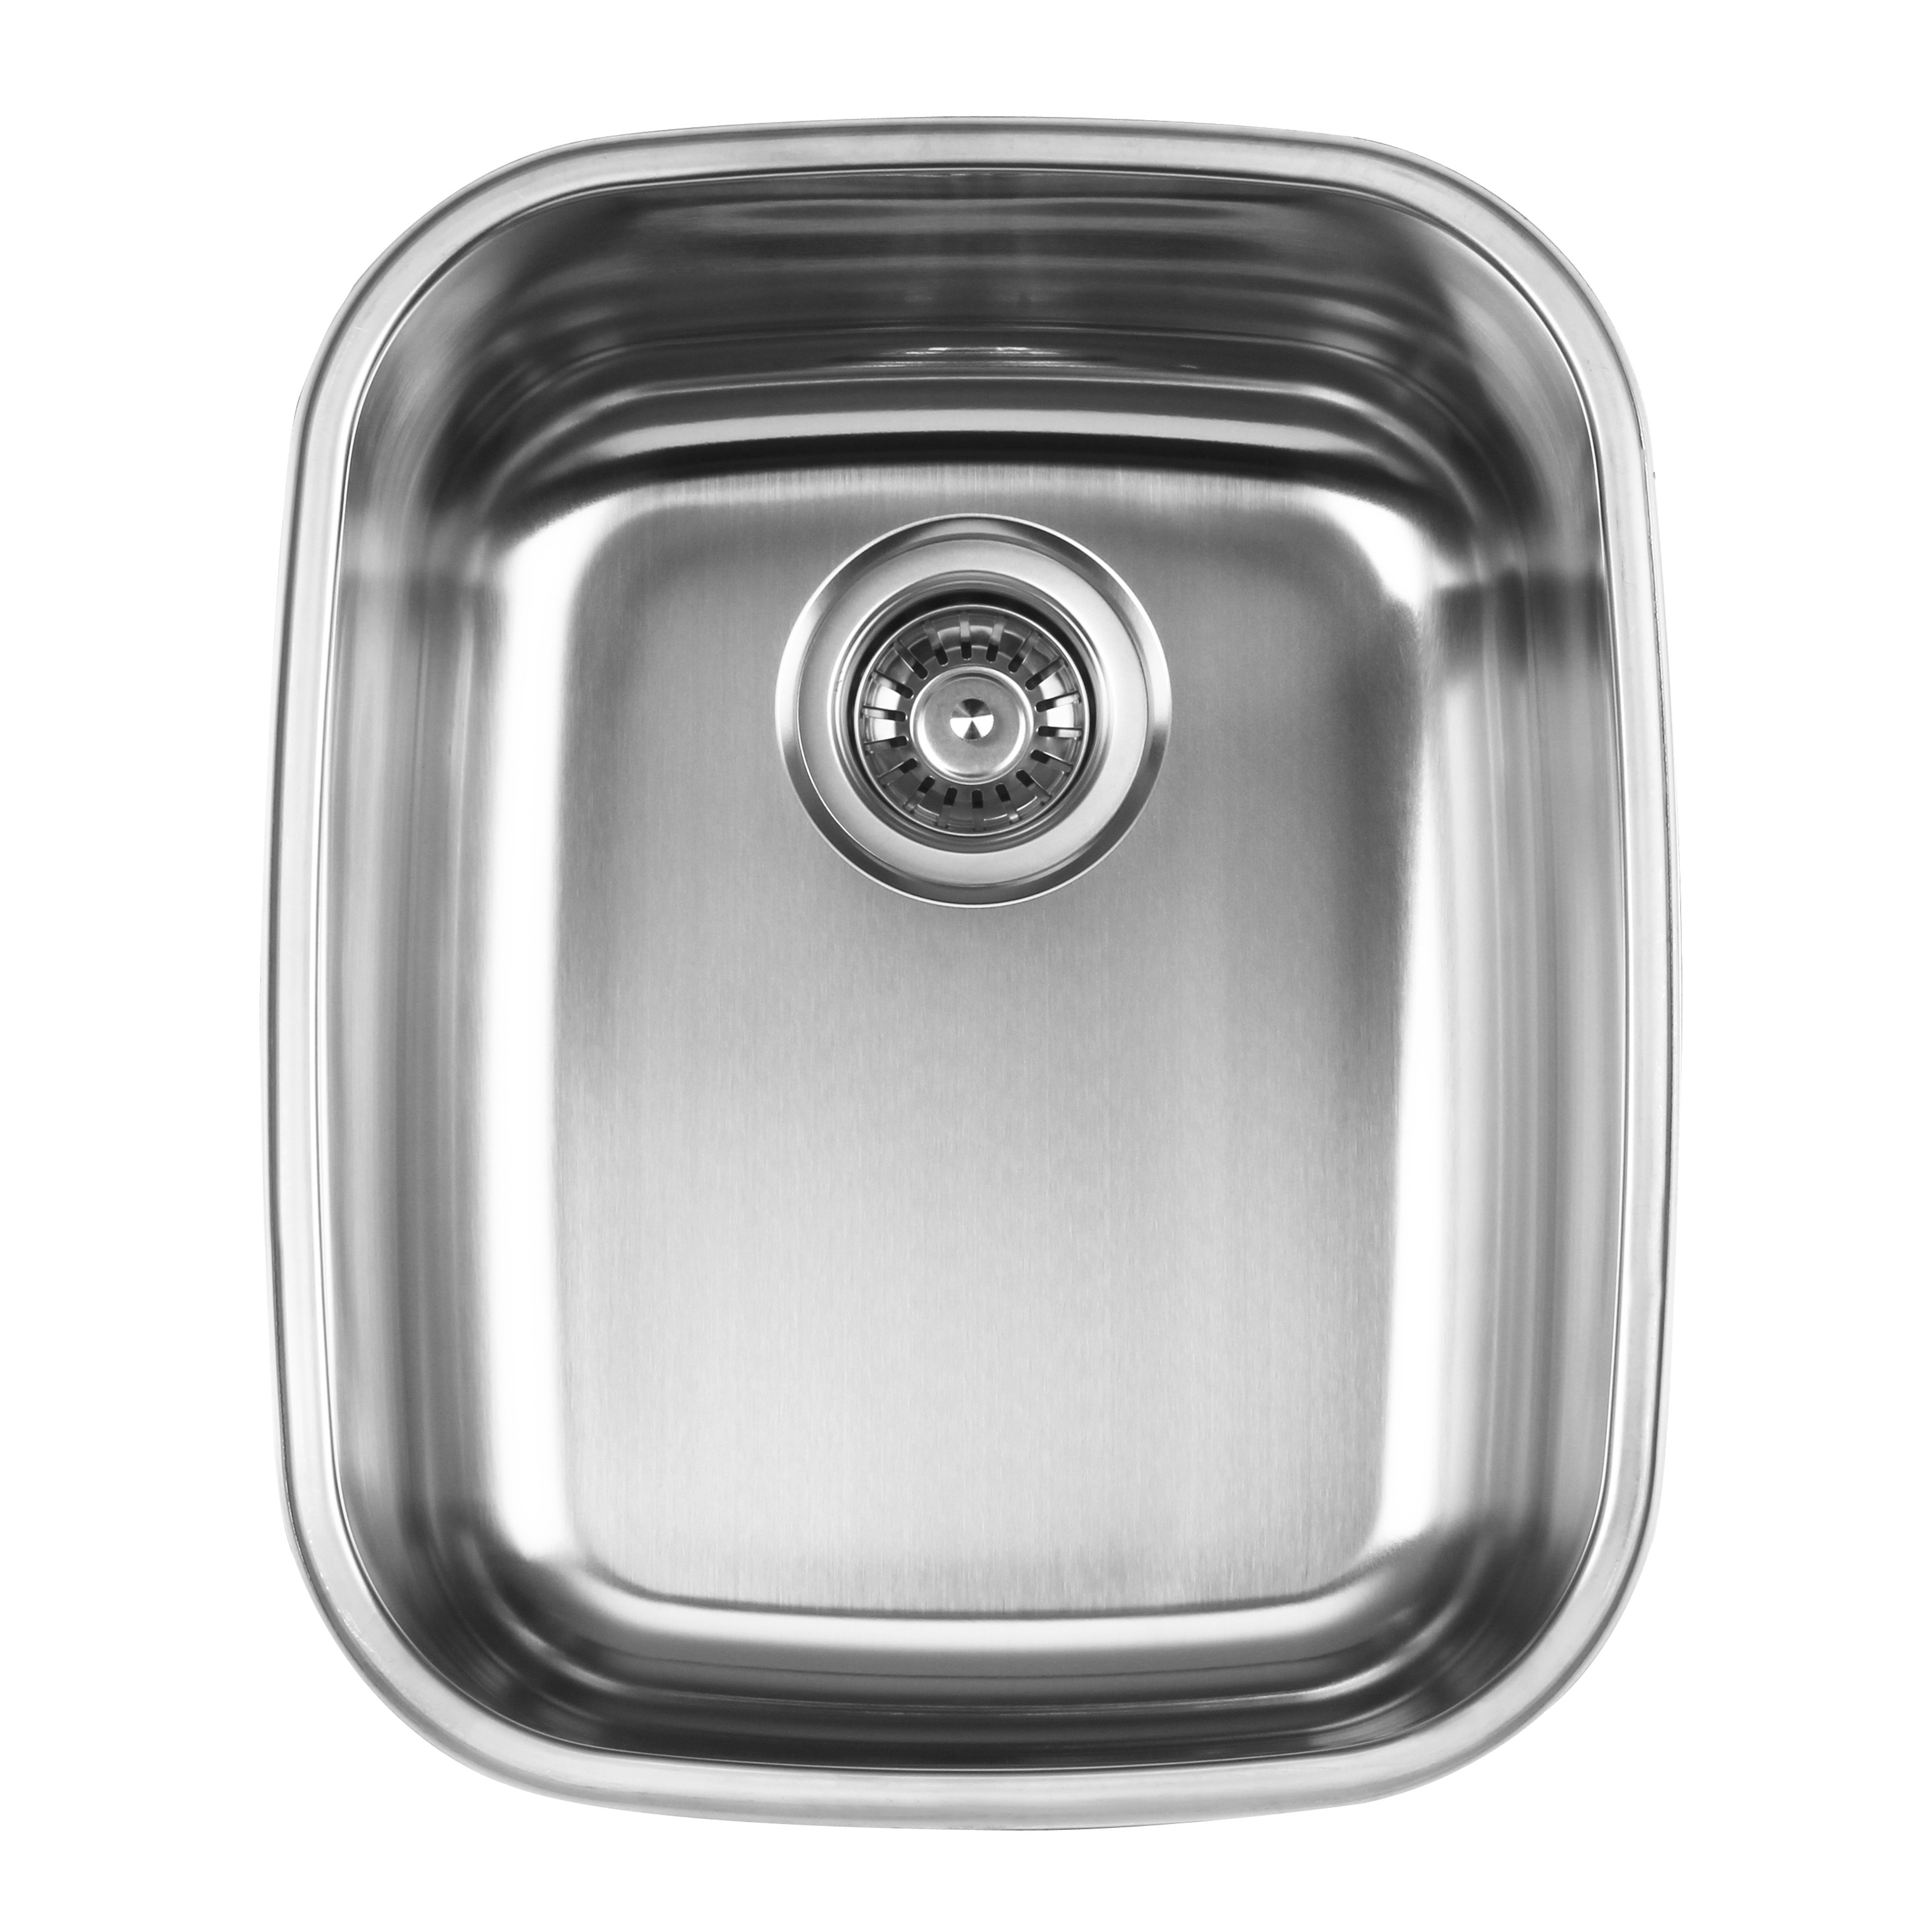 Ukinox D376 10rb Undermount Double Bowl Stainless Steel Kitchen Sink With Rinsing Basket